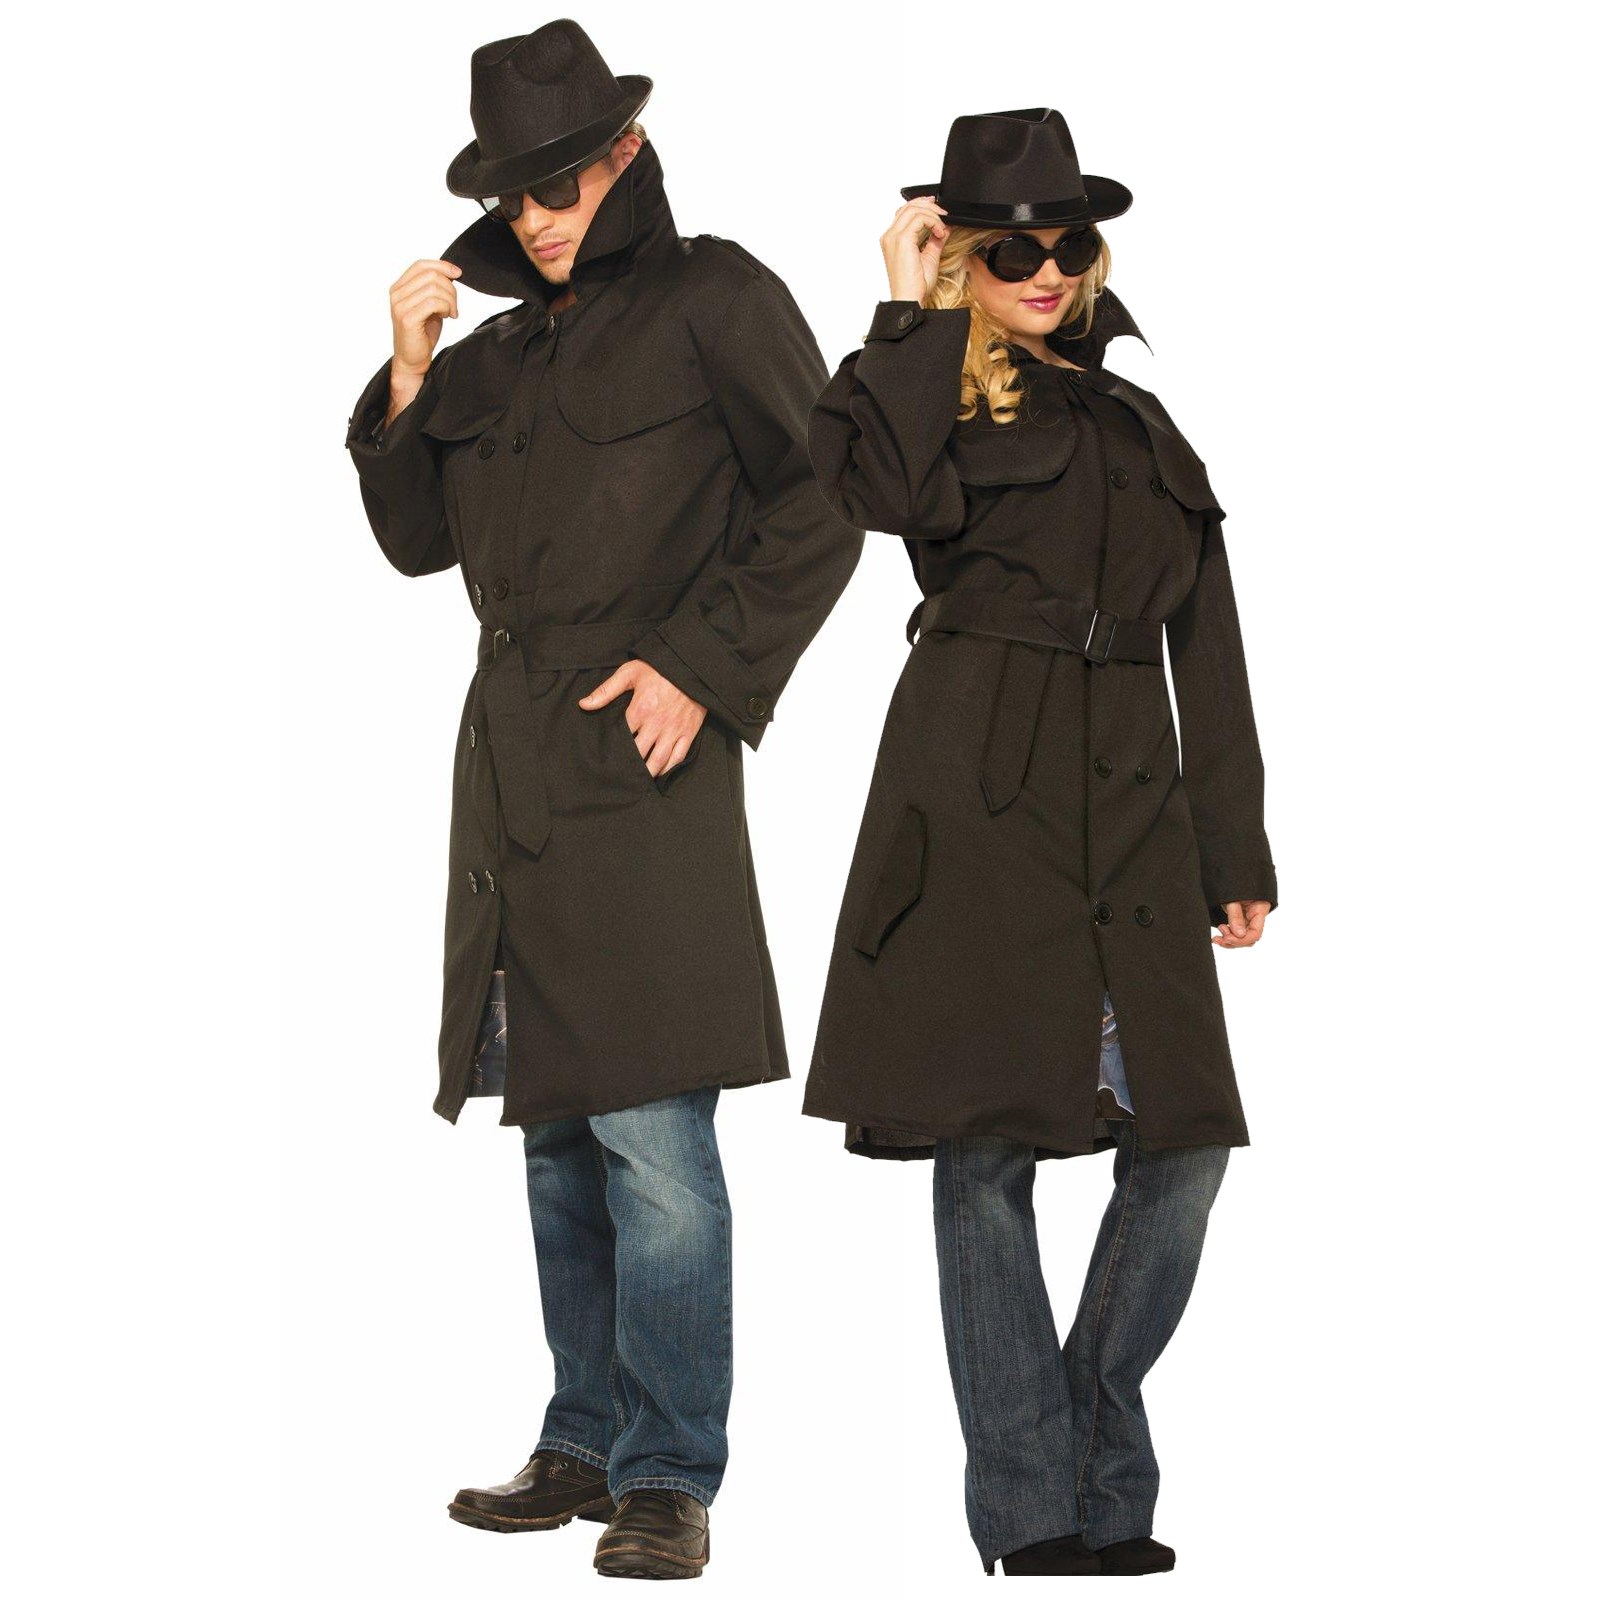 Adult Flasher Couples Costume